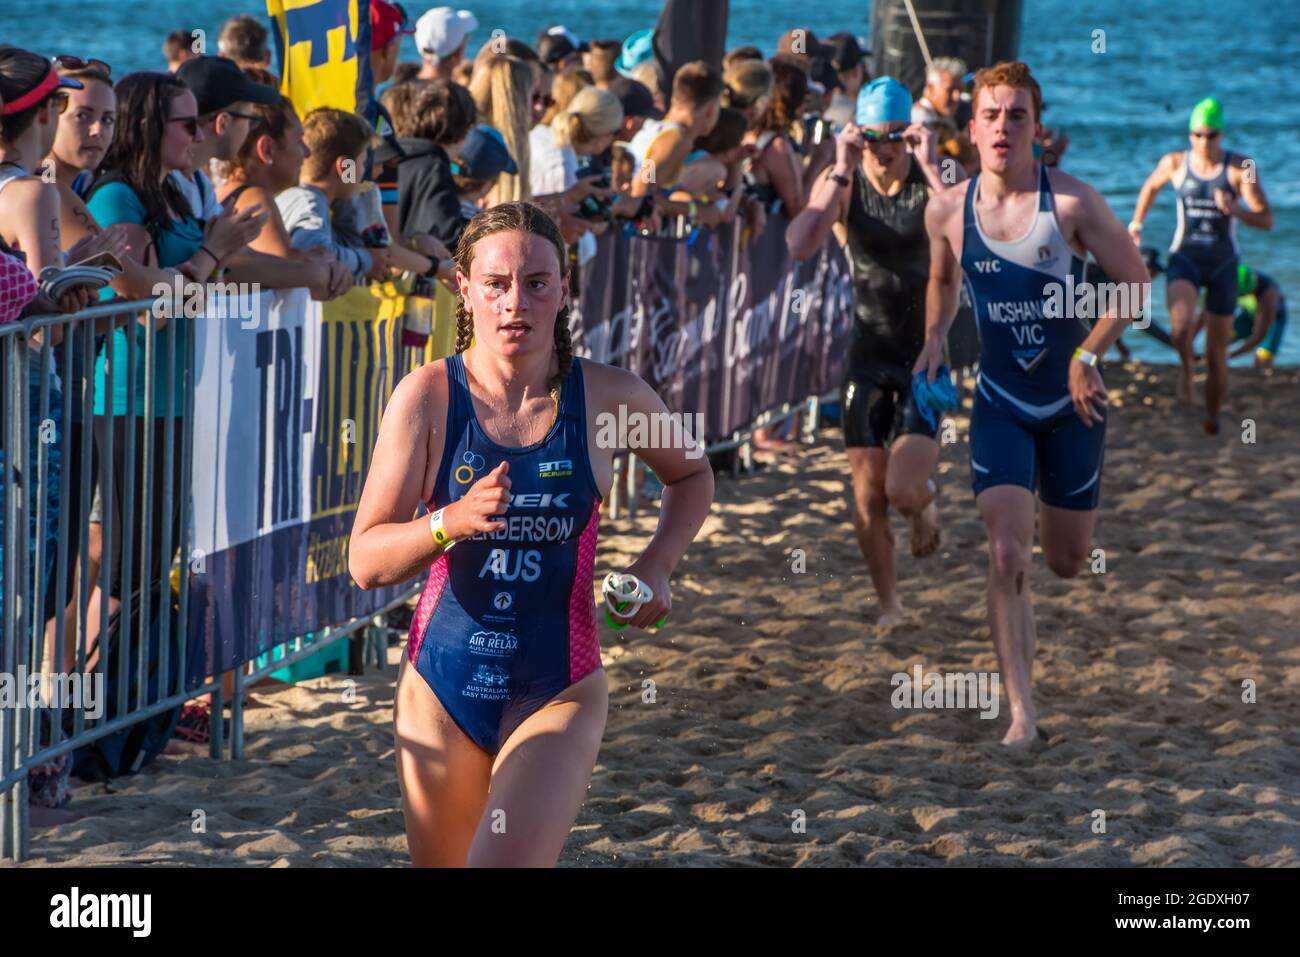 Melbourne, Australia. 03rd Feb, 2019. Triathletes are seen running on the sand after swimming race